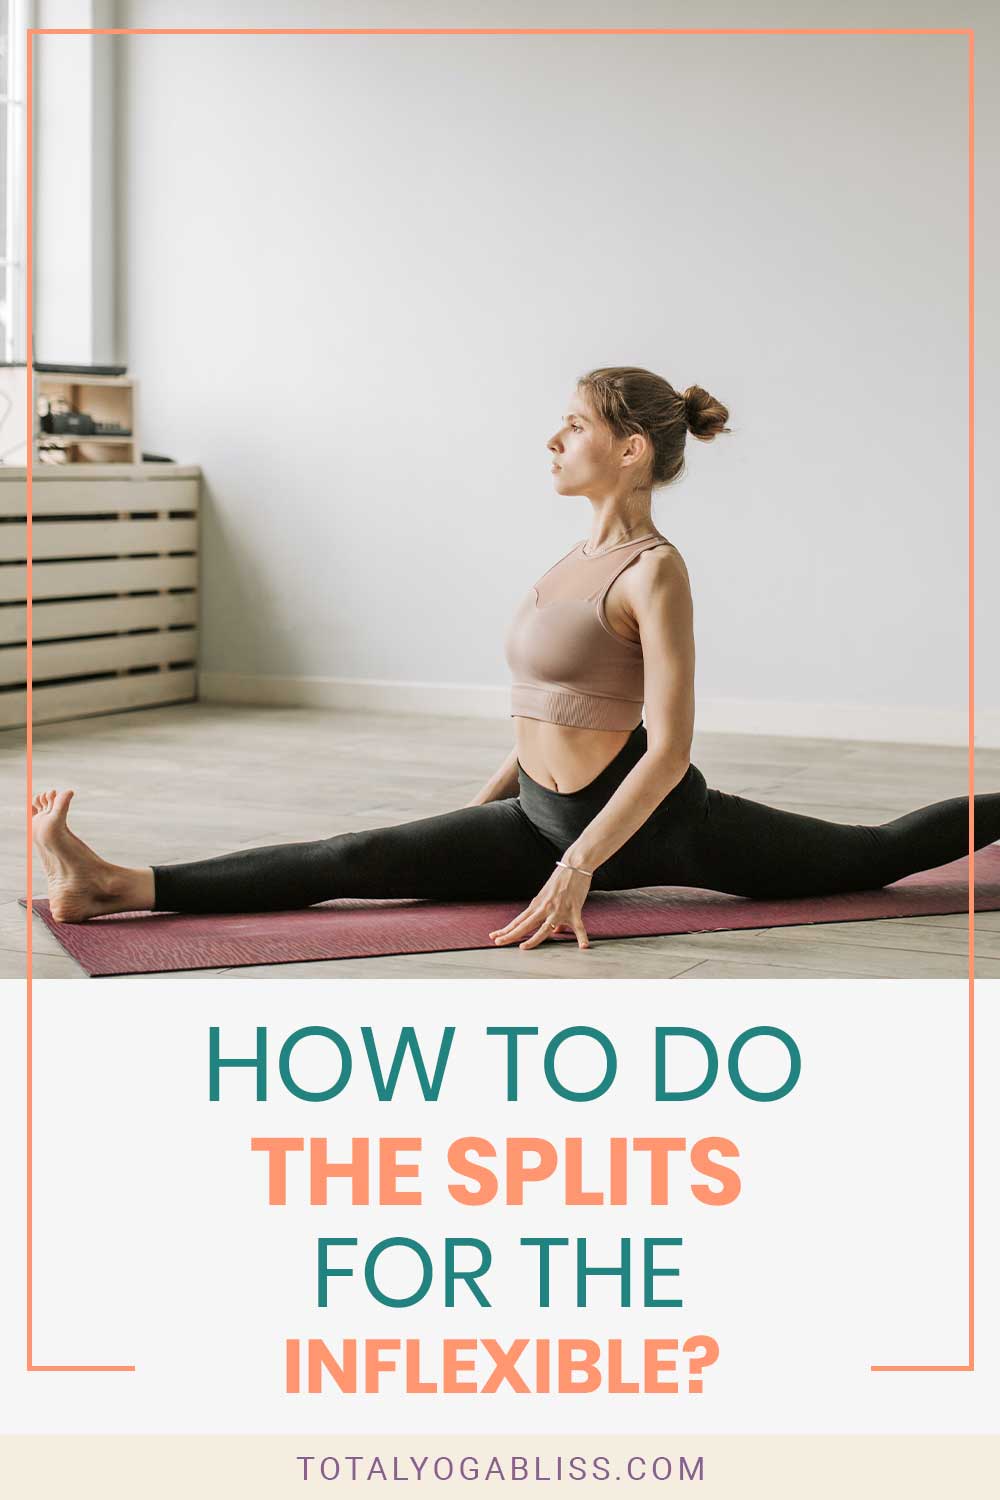 How To Do The Splits For The Inflexible?